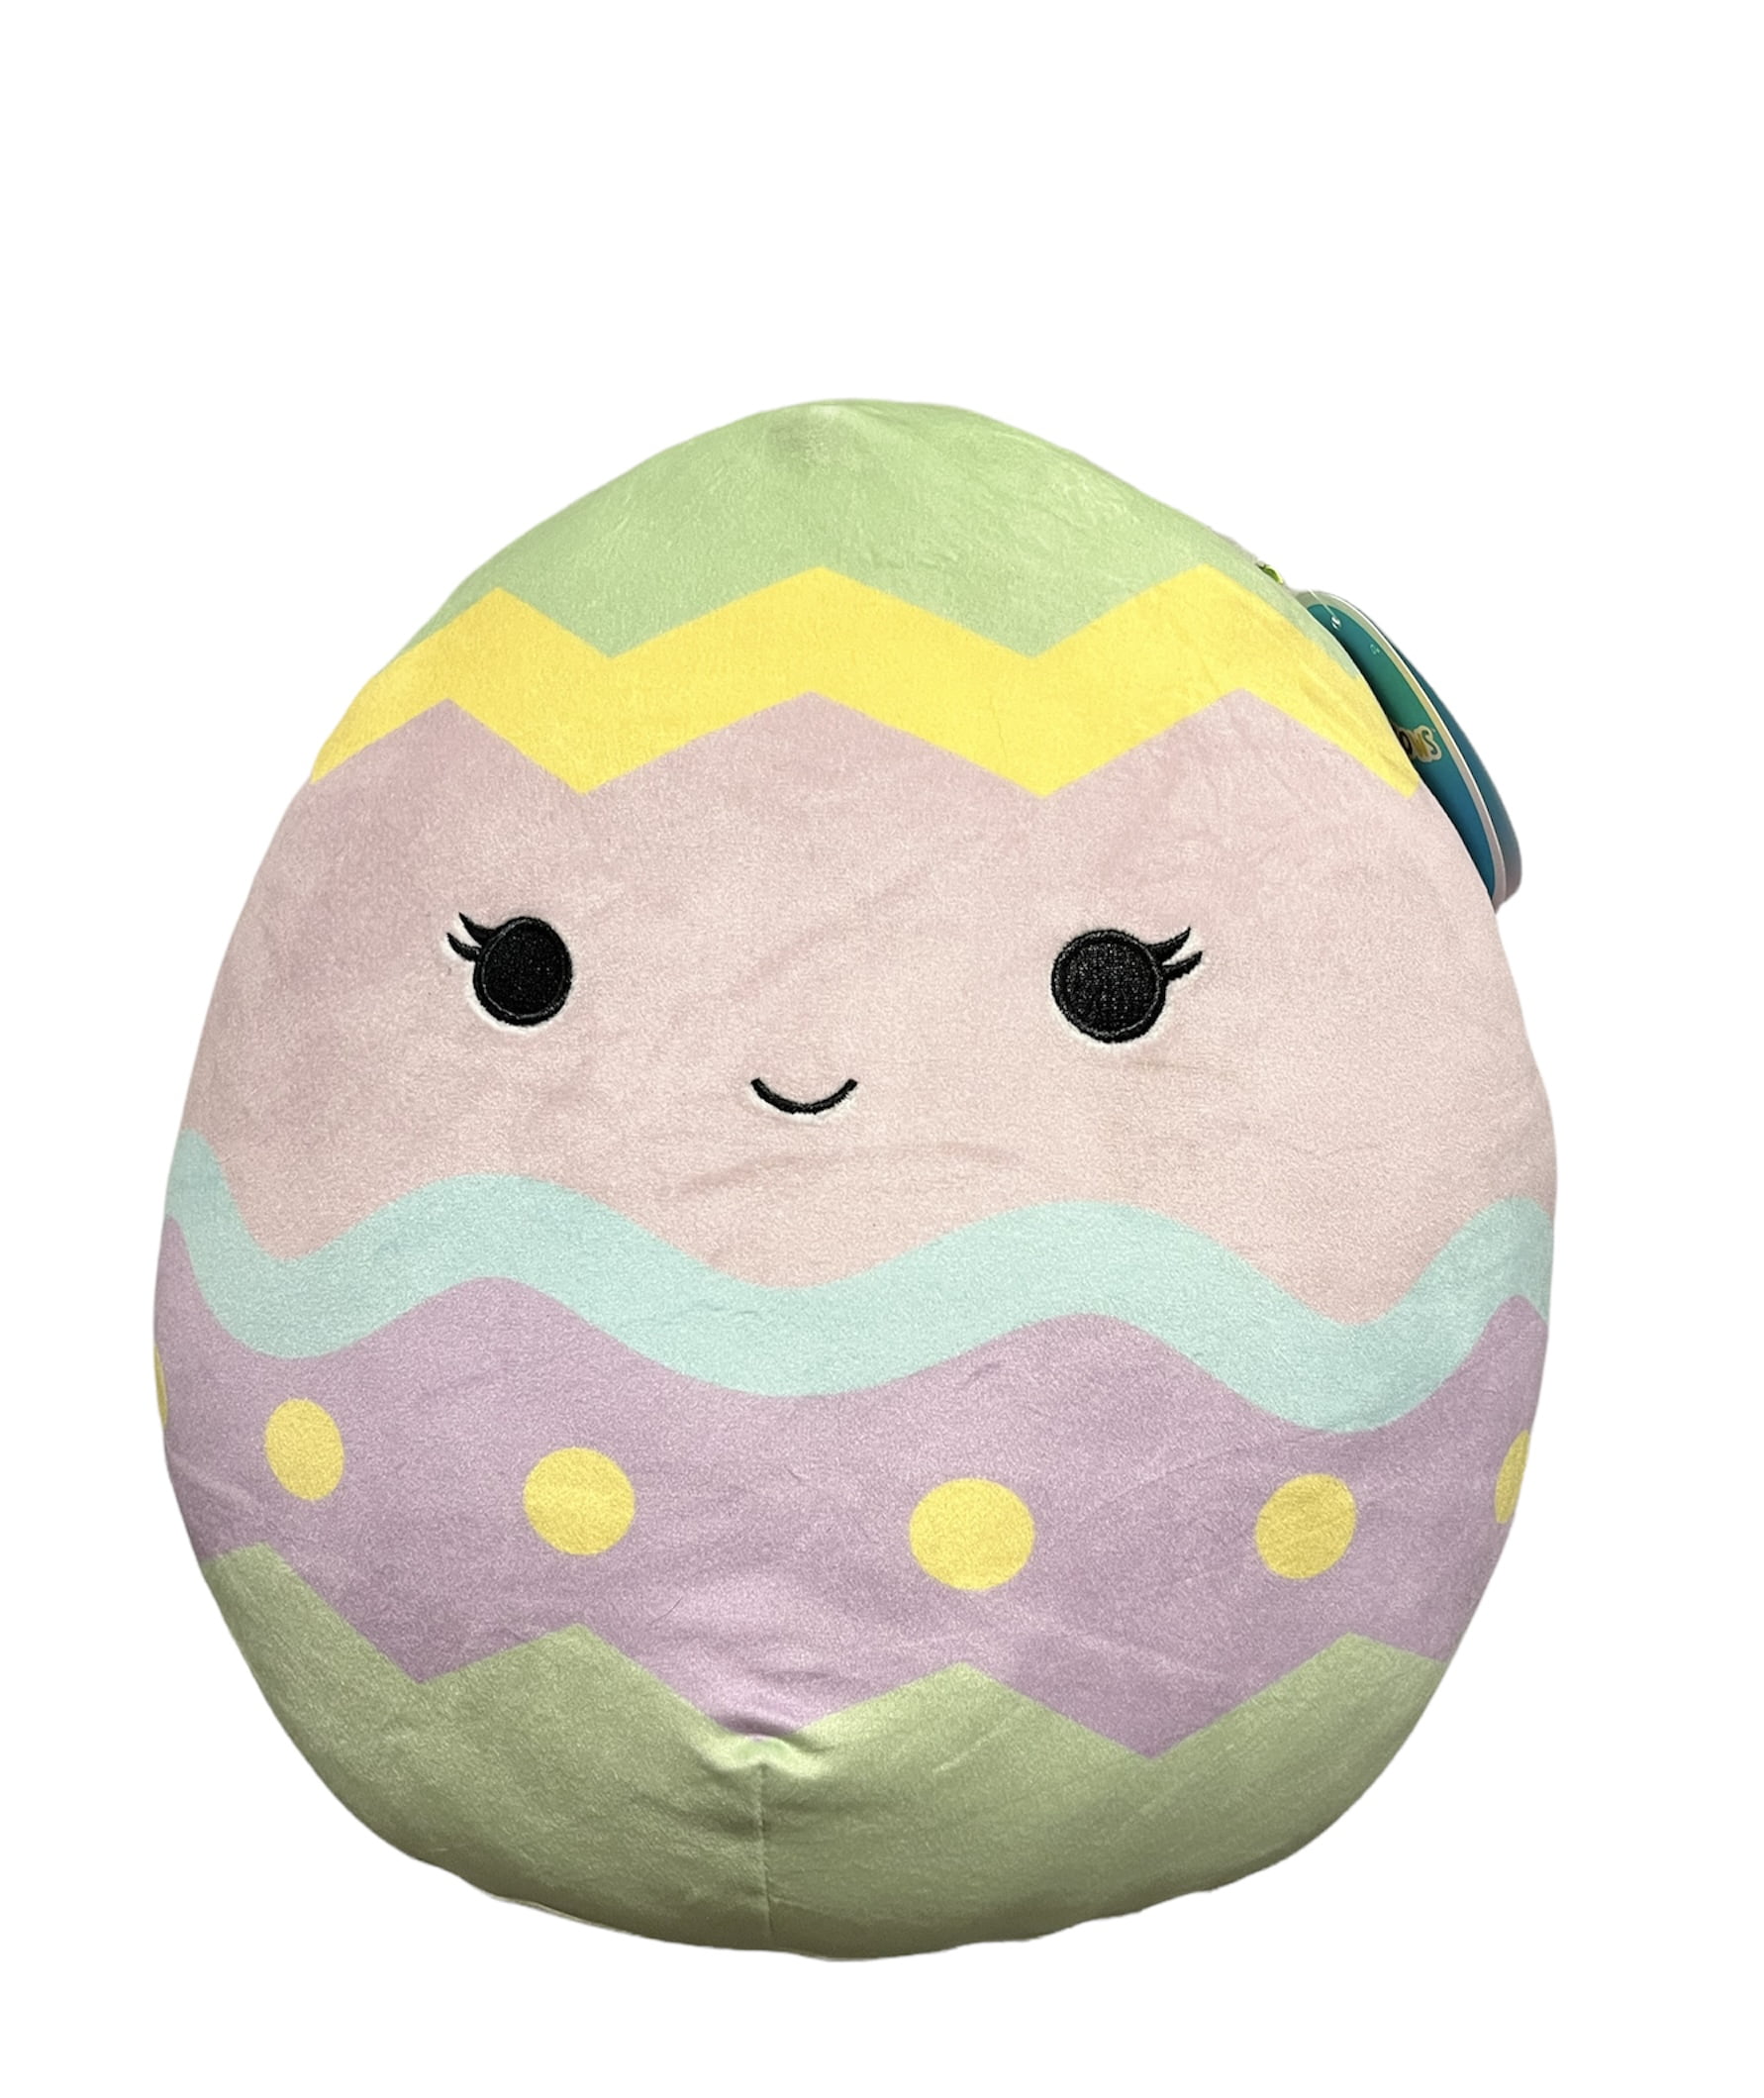 Squishmallows Official Kellytoys Plush 12 Inch Edie the Easter Egg ...